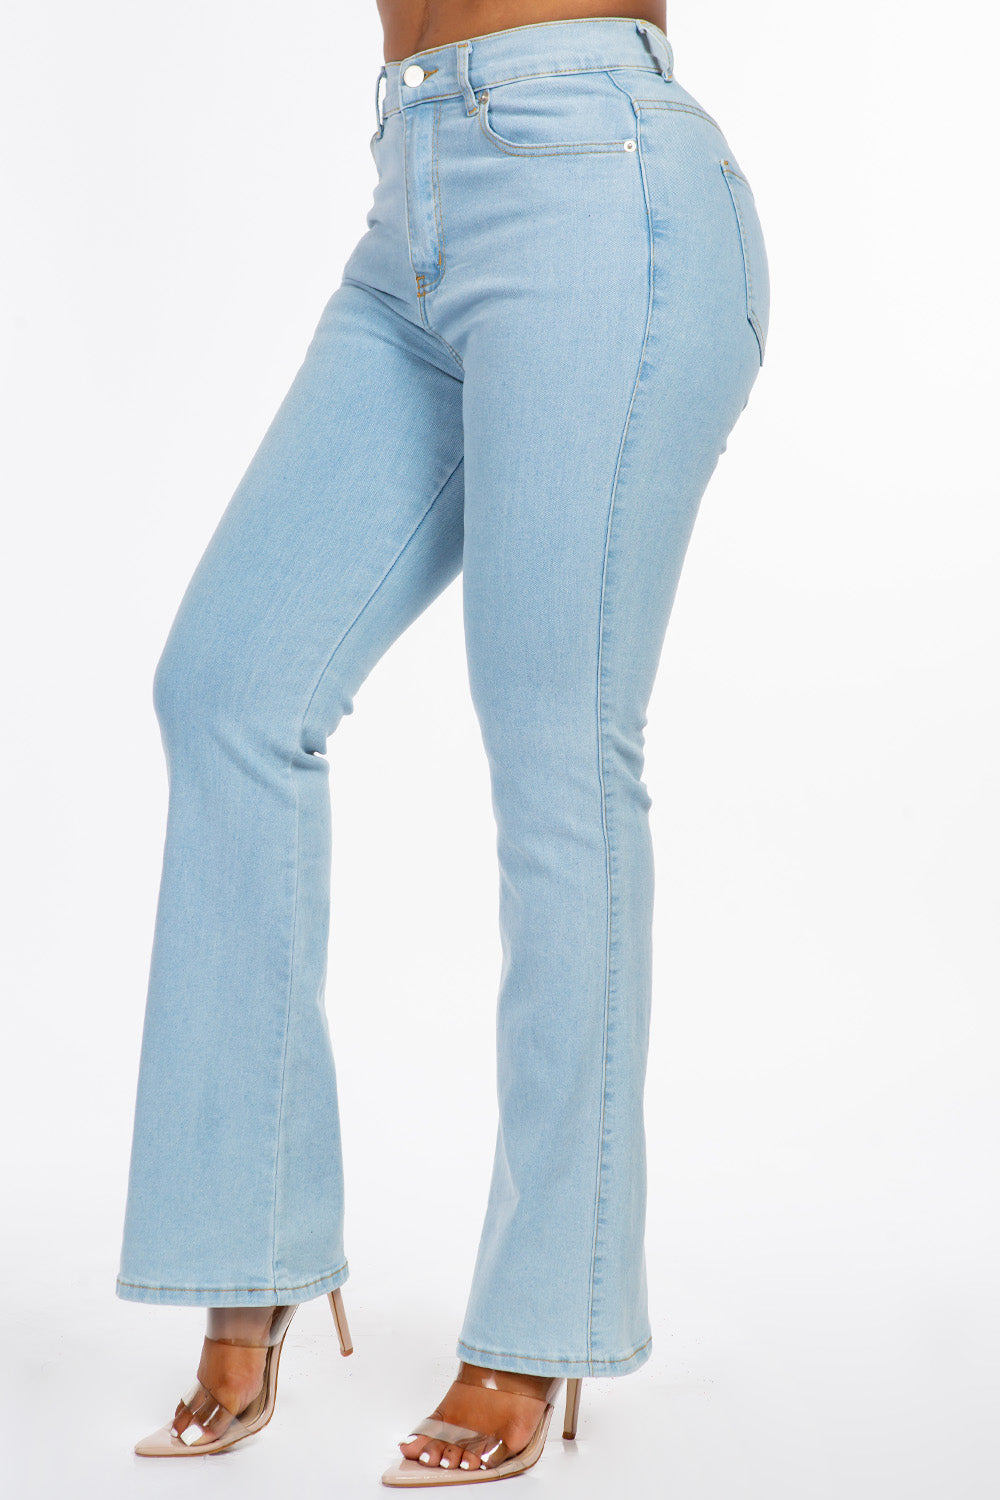 Extreme Stretch High Waist Bootcut Flare Jean Light YH2202